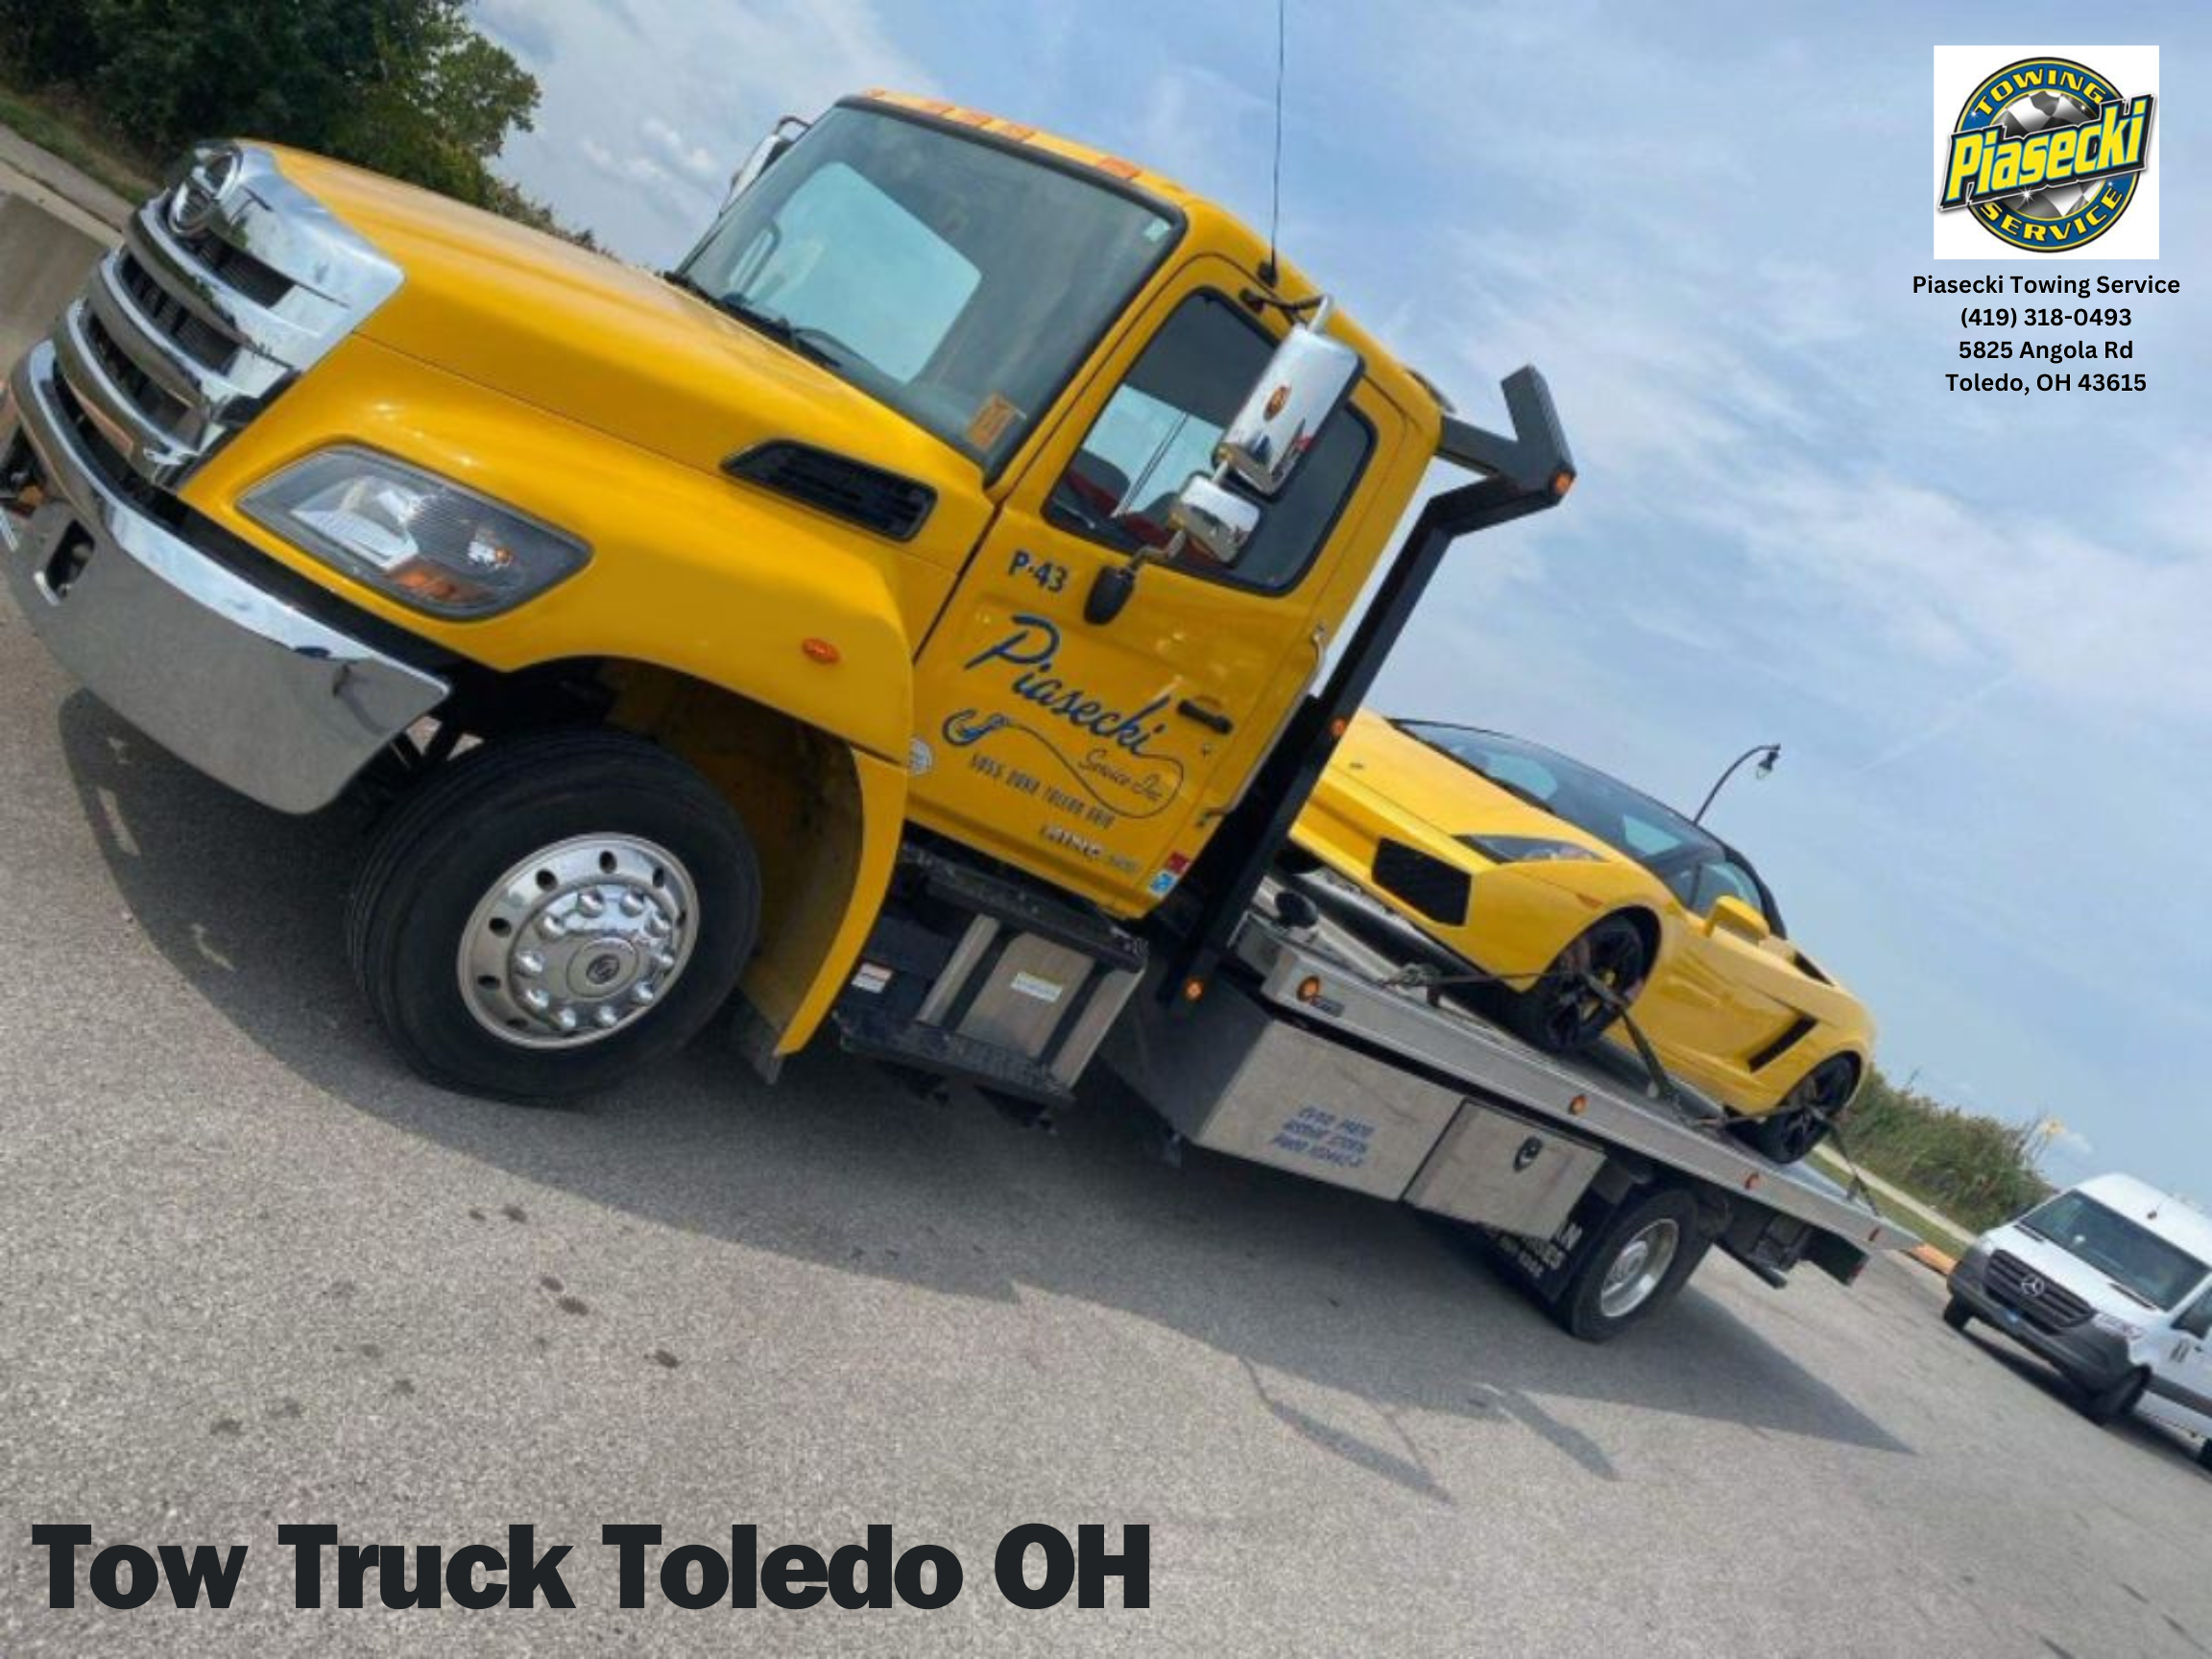 Piasecki Towing Service: 88 Years of Commitment to Excellence in Toledo, OH